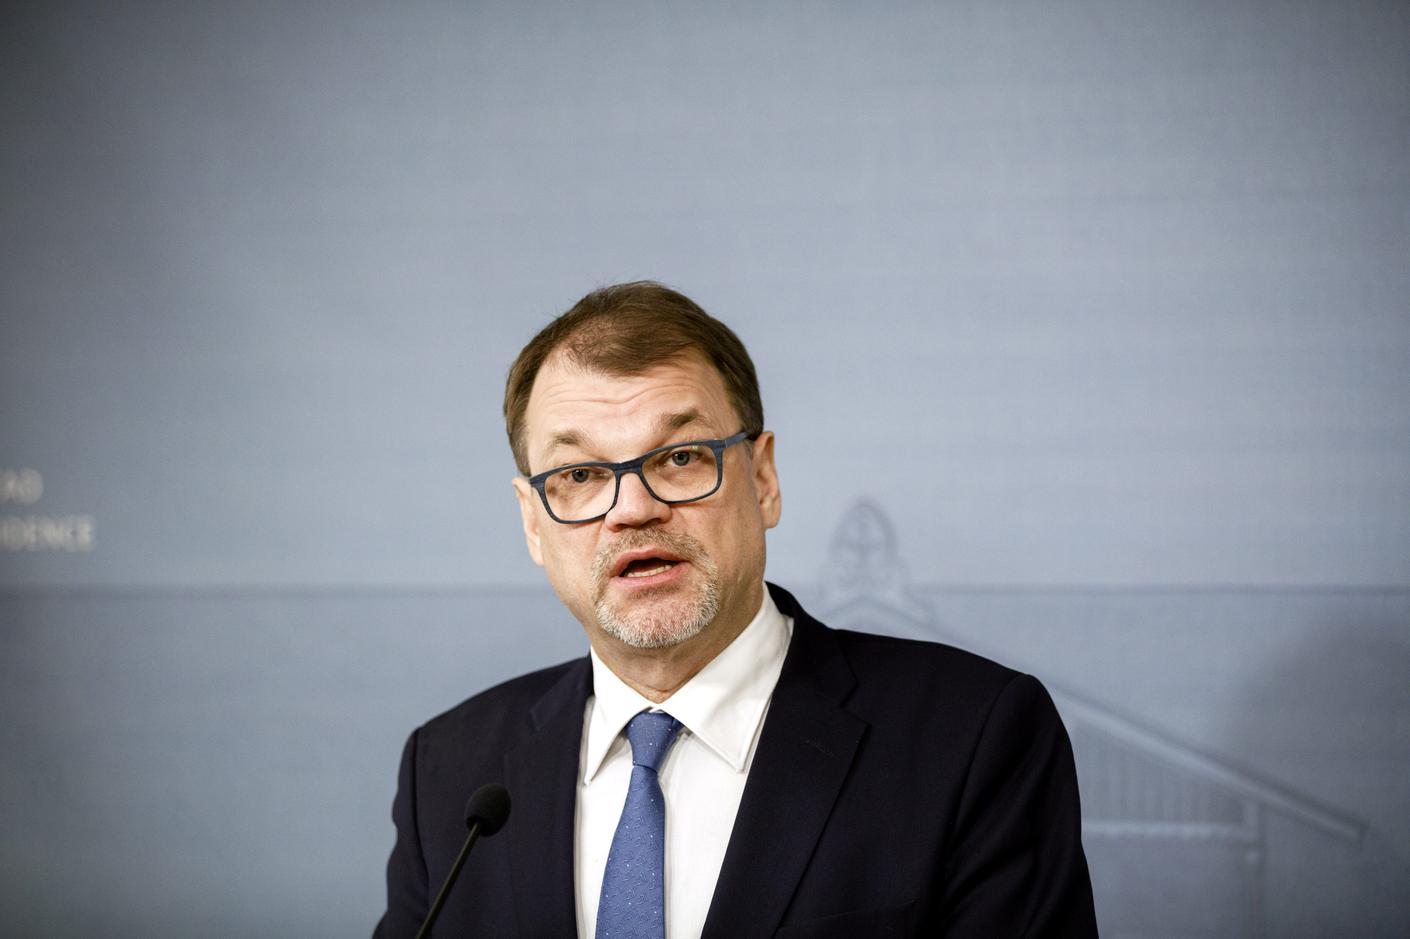 Finland's cabinet quits over failure to deliver healthcare reform